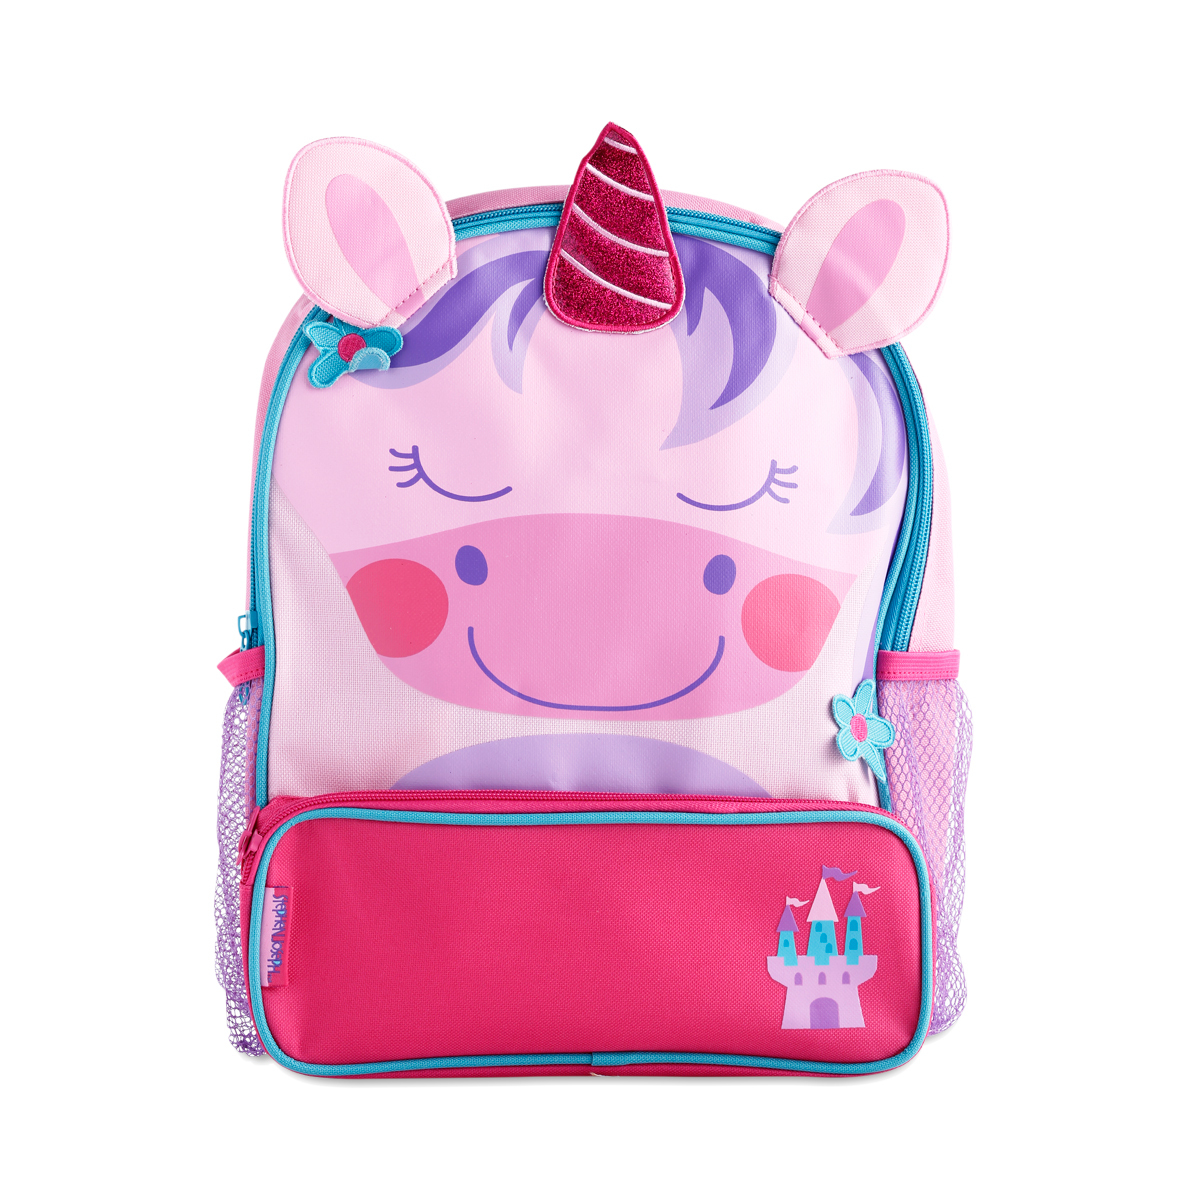 Stephen Joseph Gifts.com Stylish Backpacks & Bags for toddlers! - Mom ...